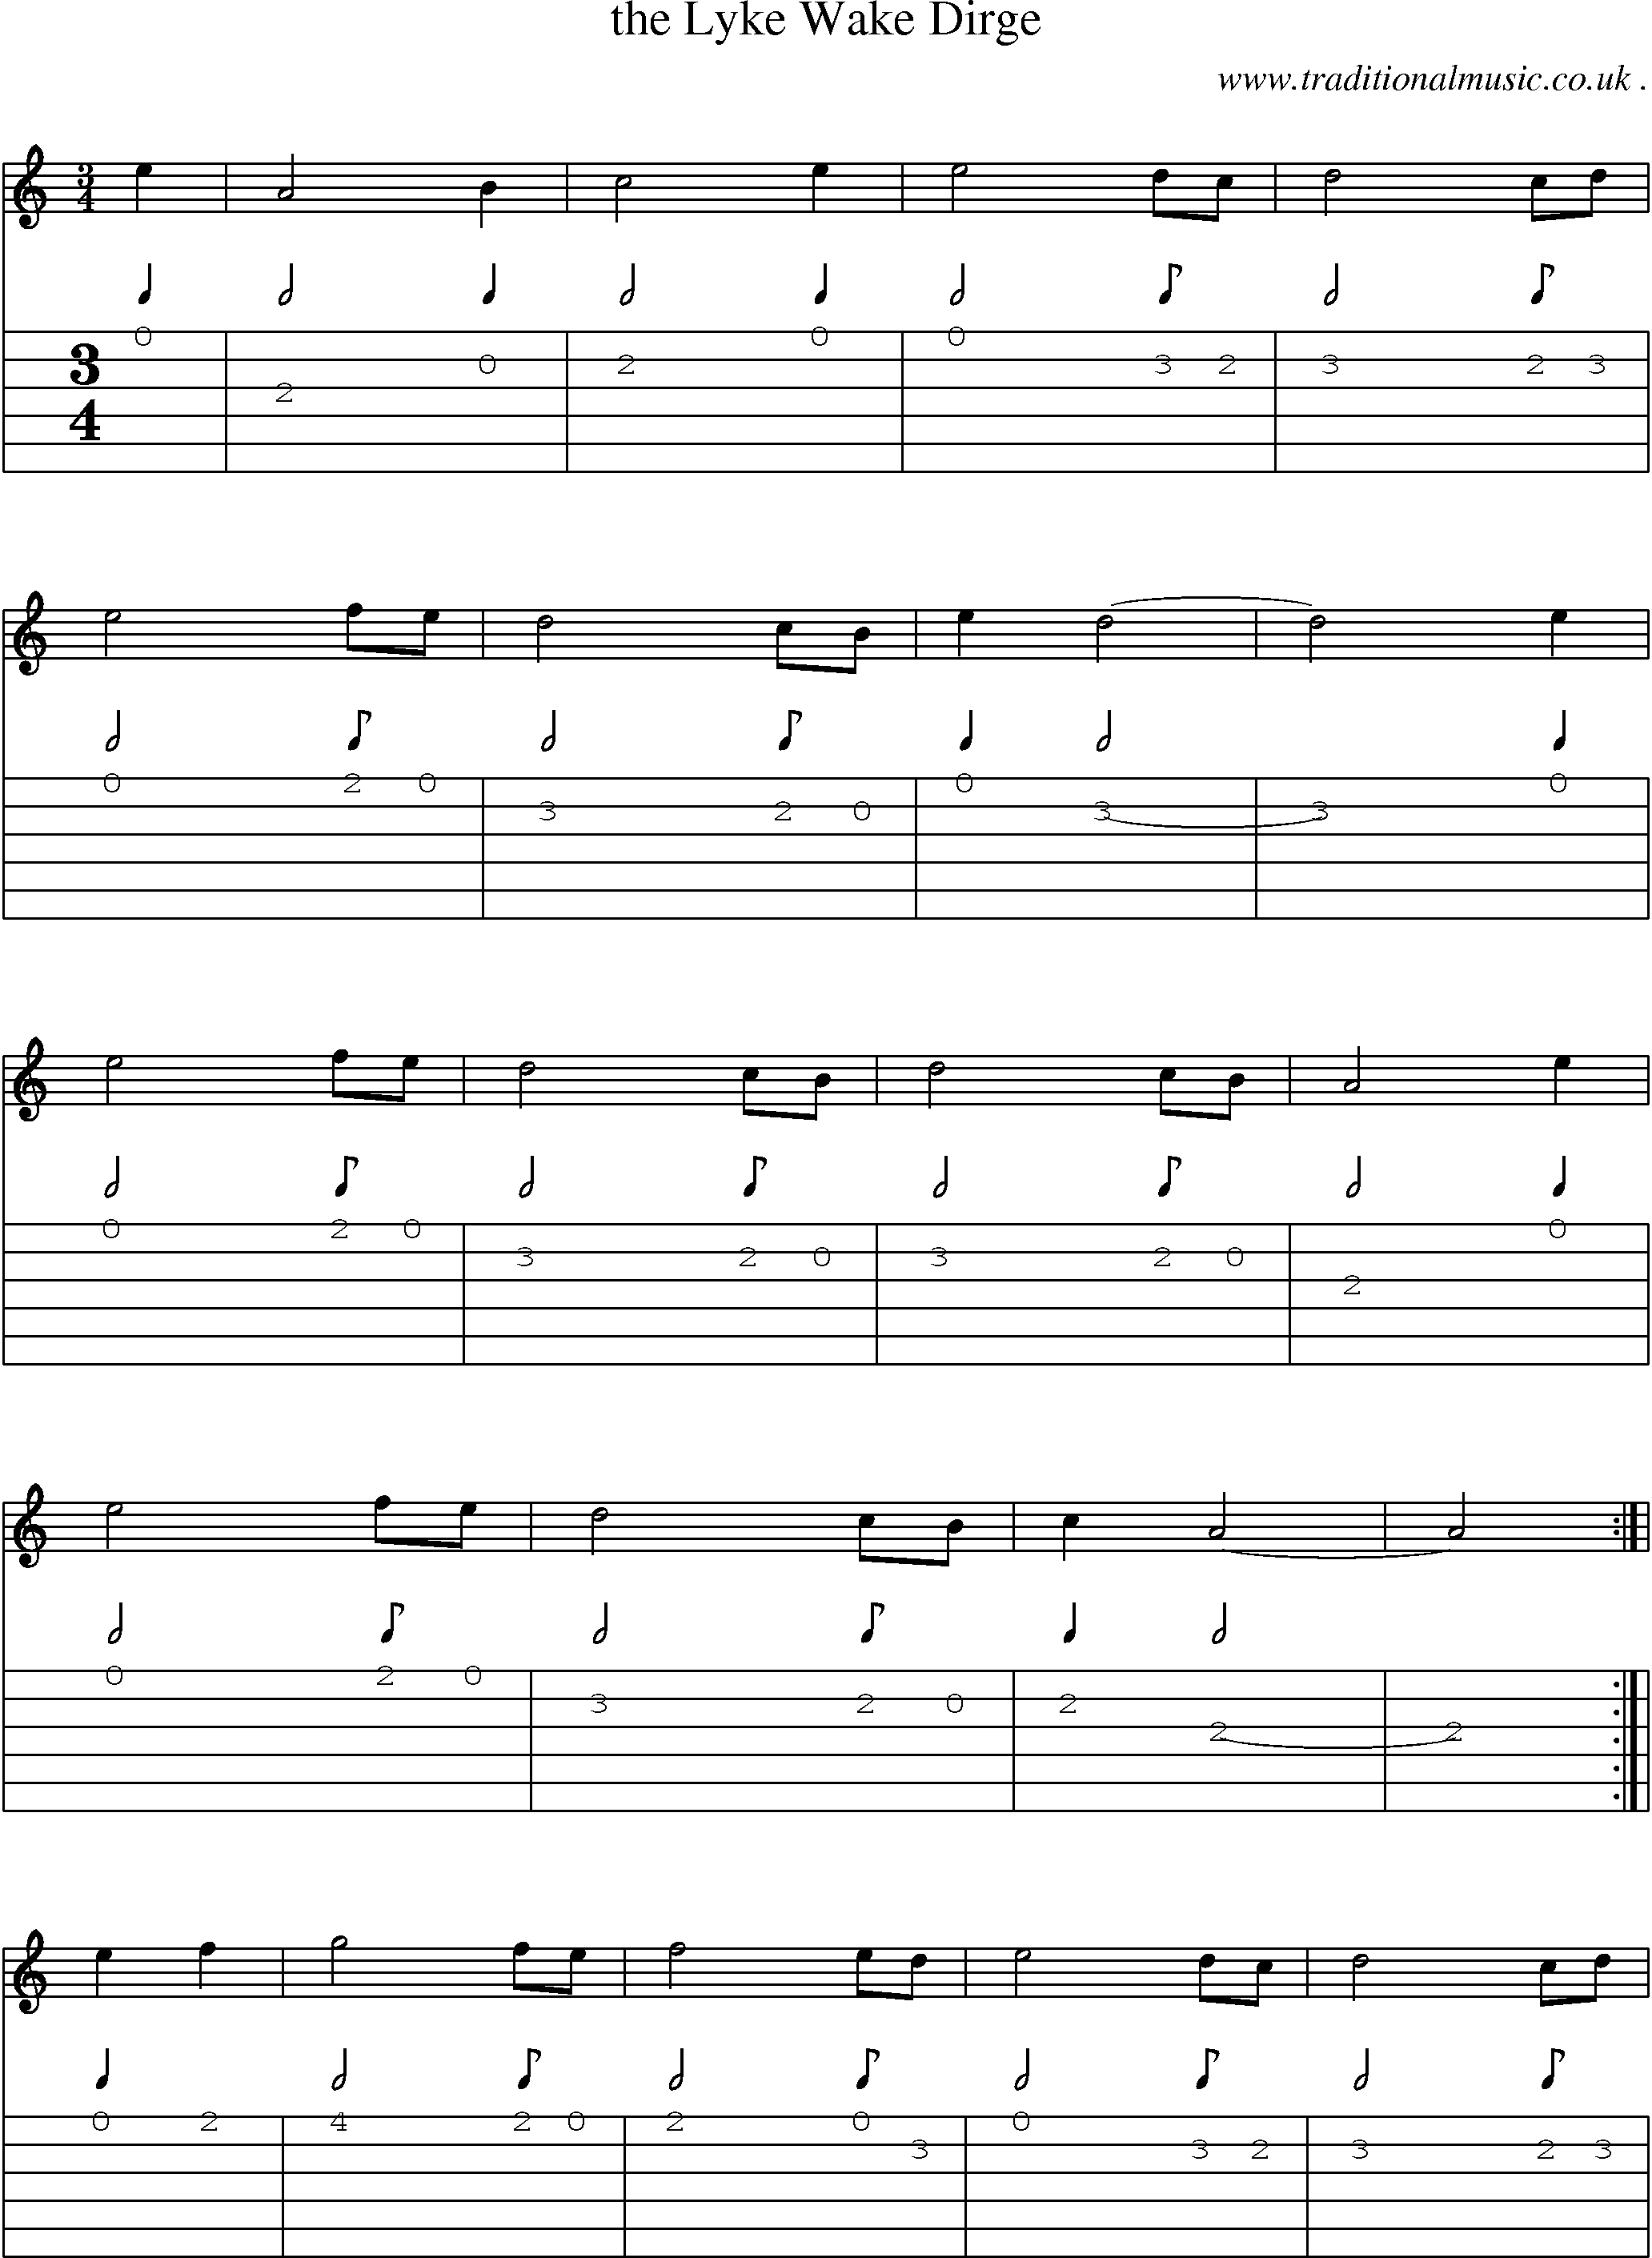 Sheet-Music and Guitar Tabs for The Lyke Wake Dirge